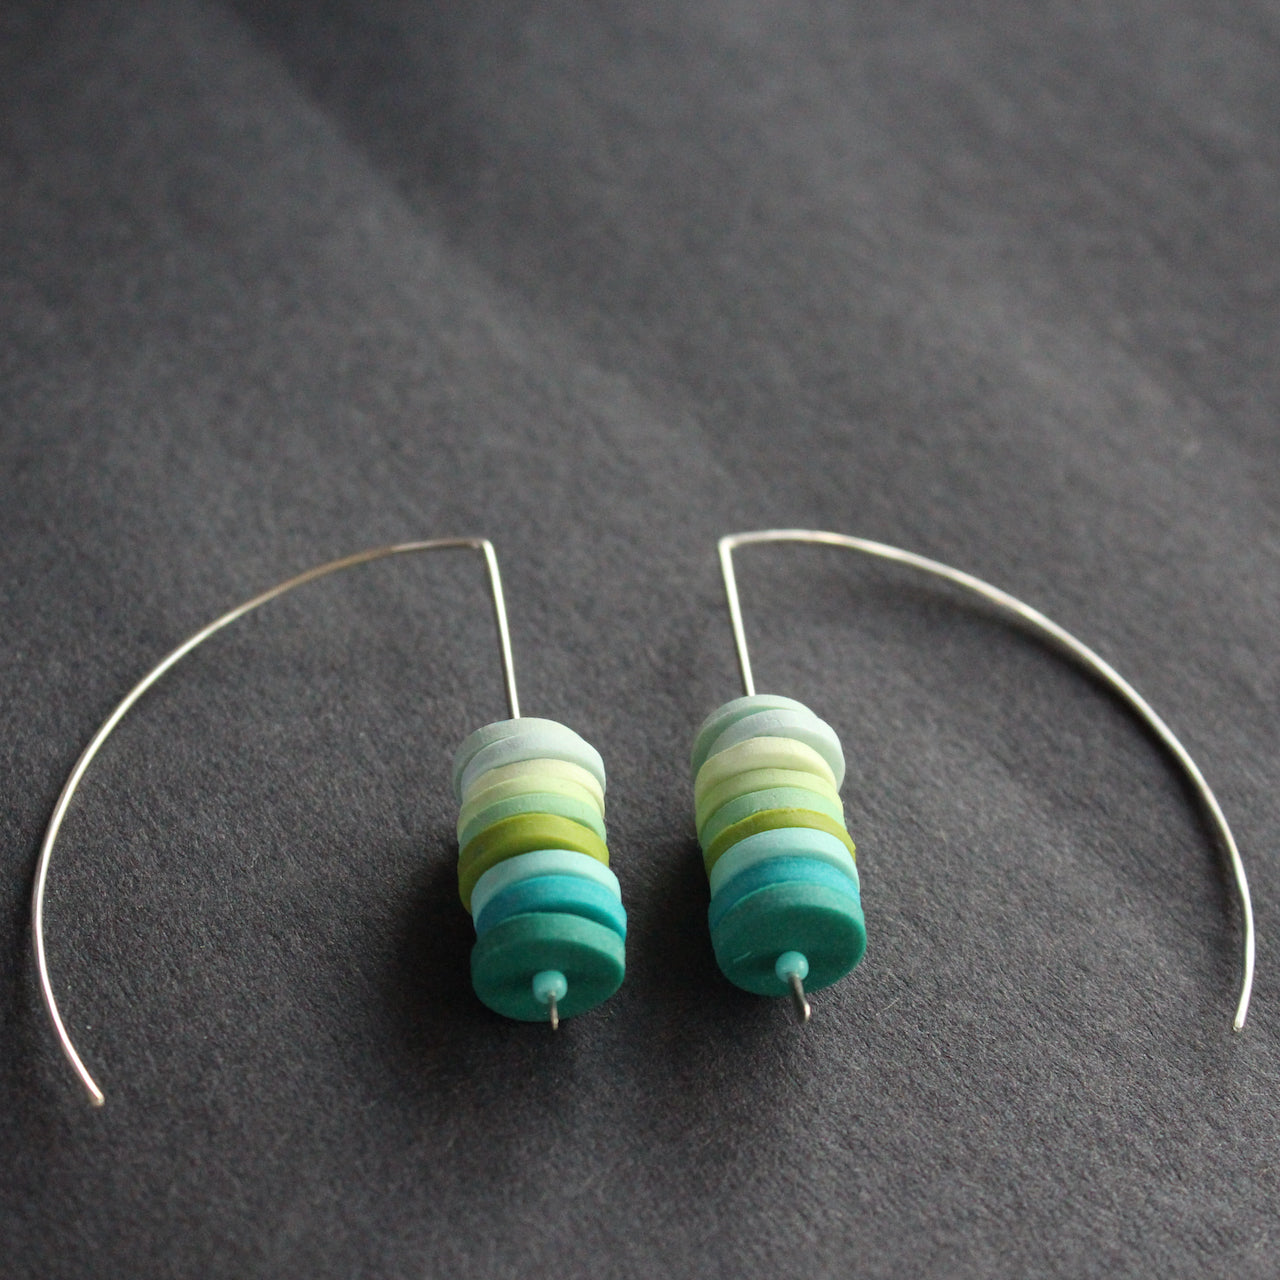 a pair of earrings made of small discs on top of each other in shades of blues and green by jewellery designer Clare Lloyd.